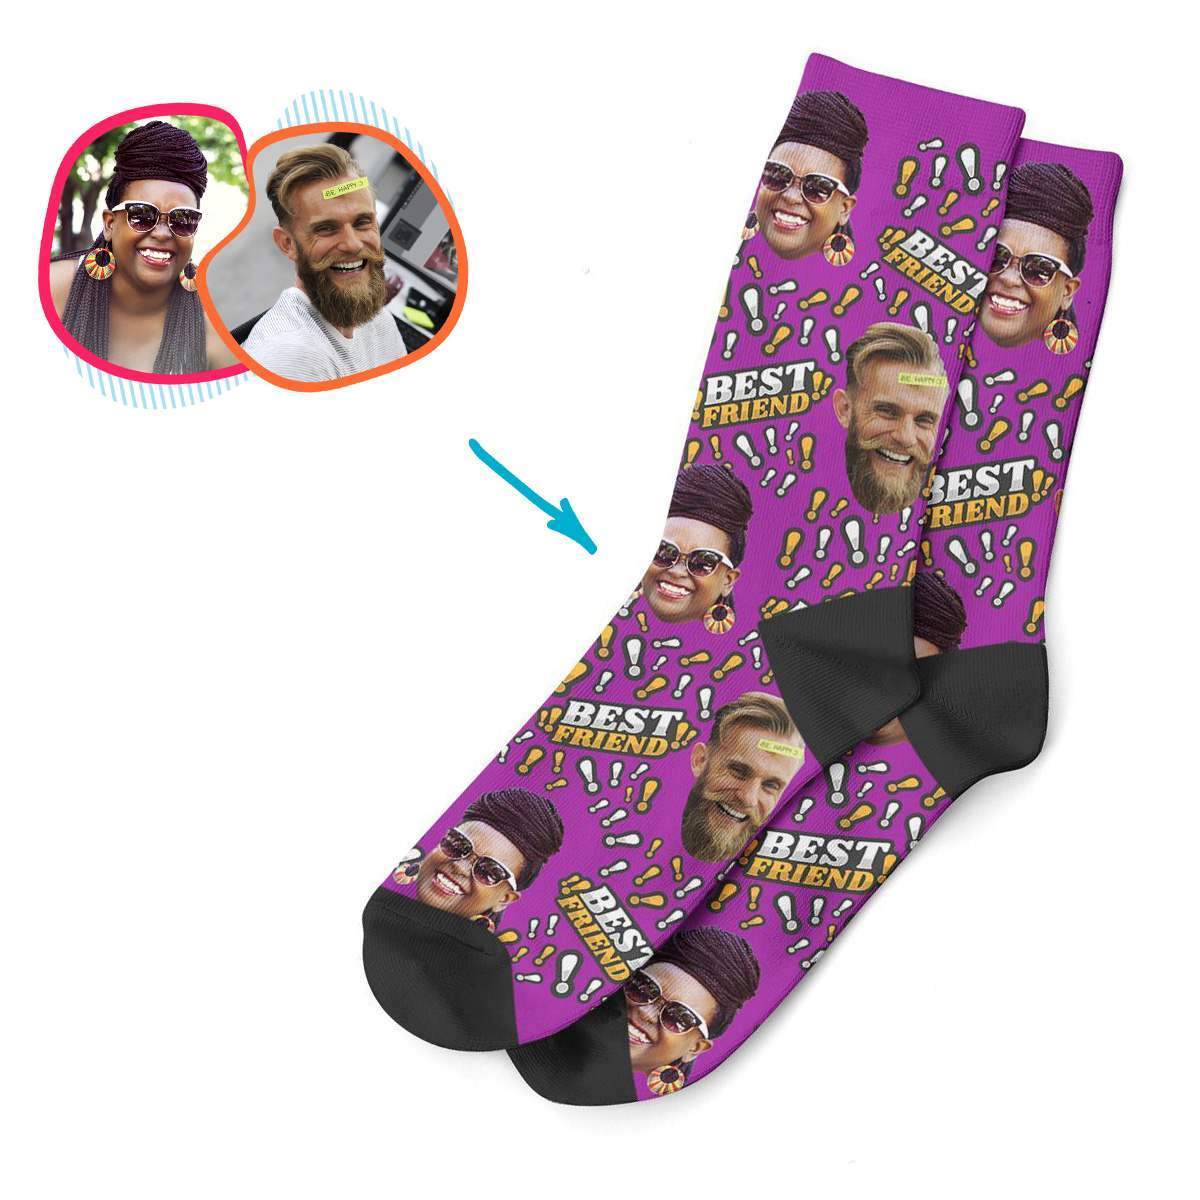 purple Best Friend socks personalized with photo of face printed on them